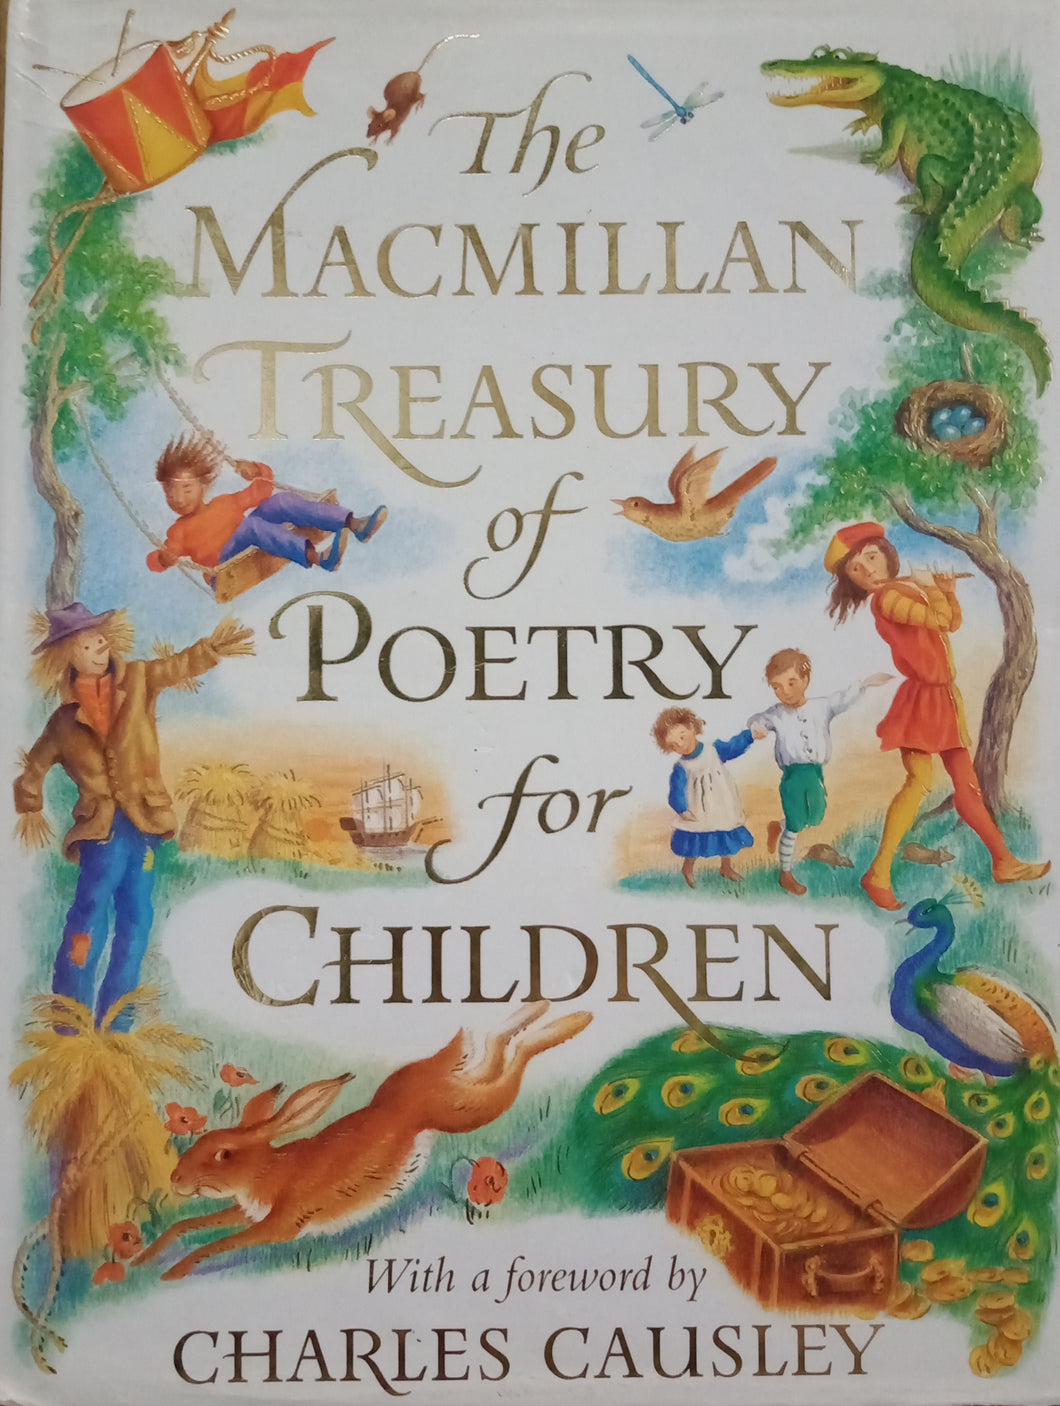 The Macmillan Treasury of Poetry for Children by Charles Causley